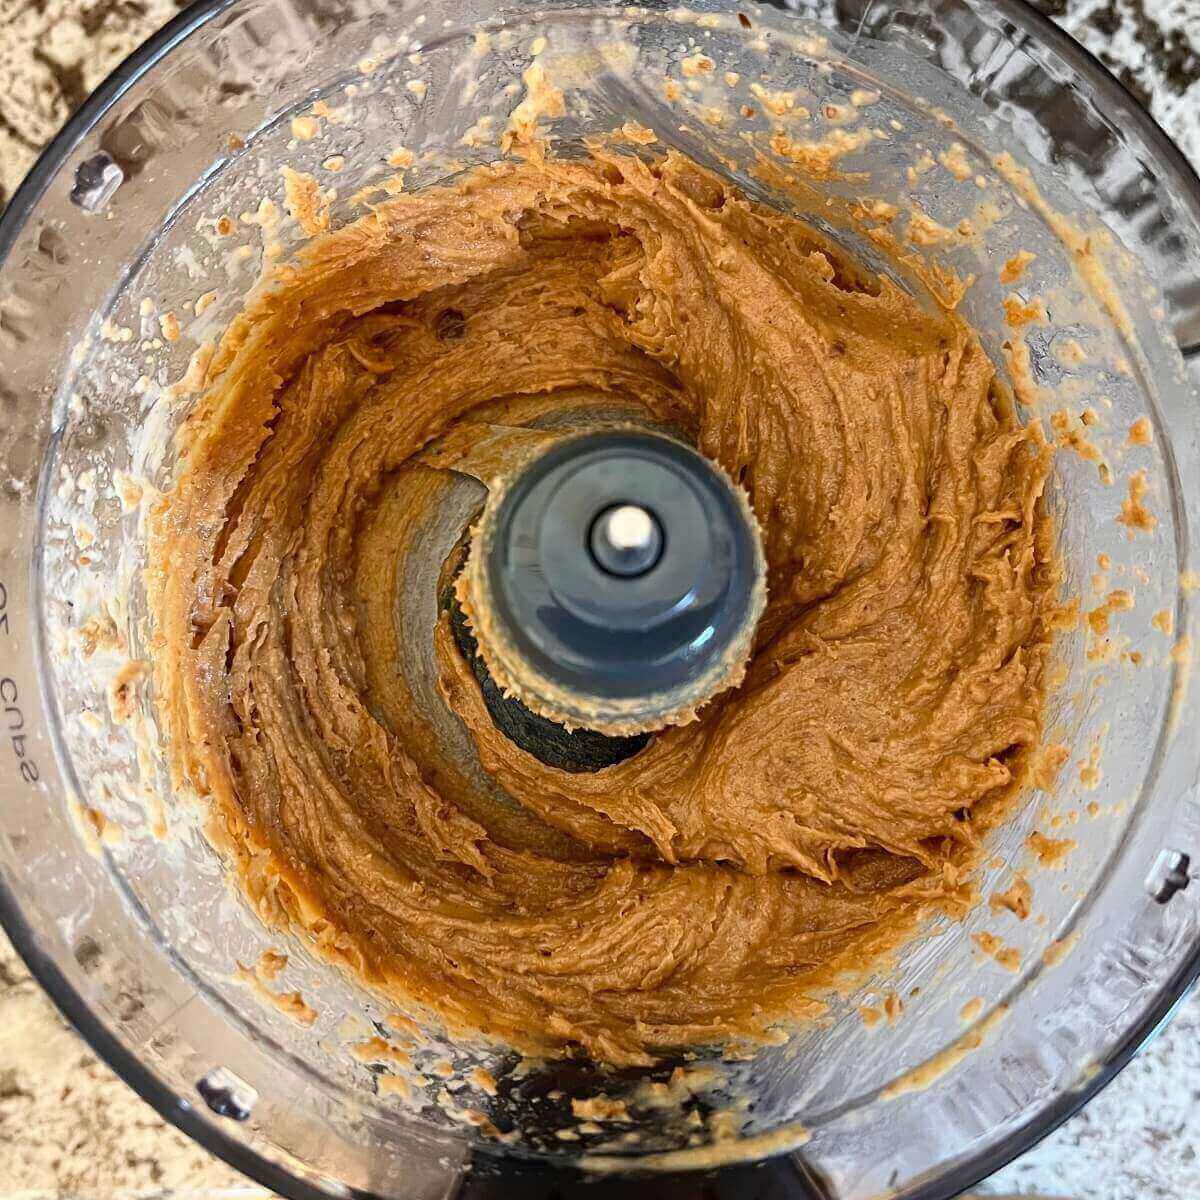 A light brown blended mixture in a food processor.